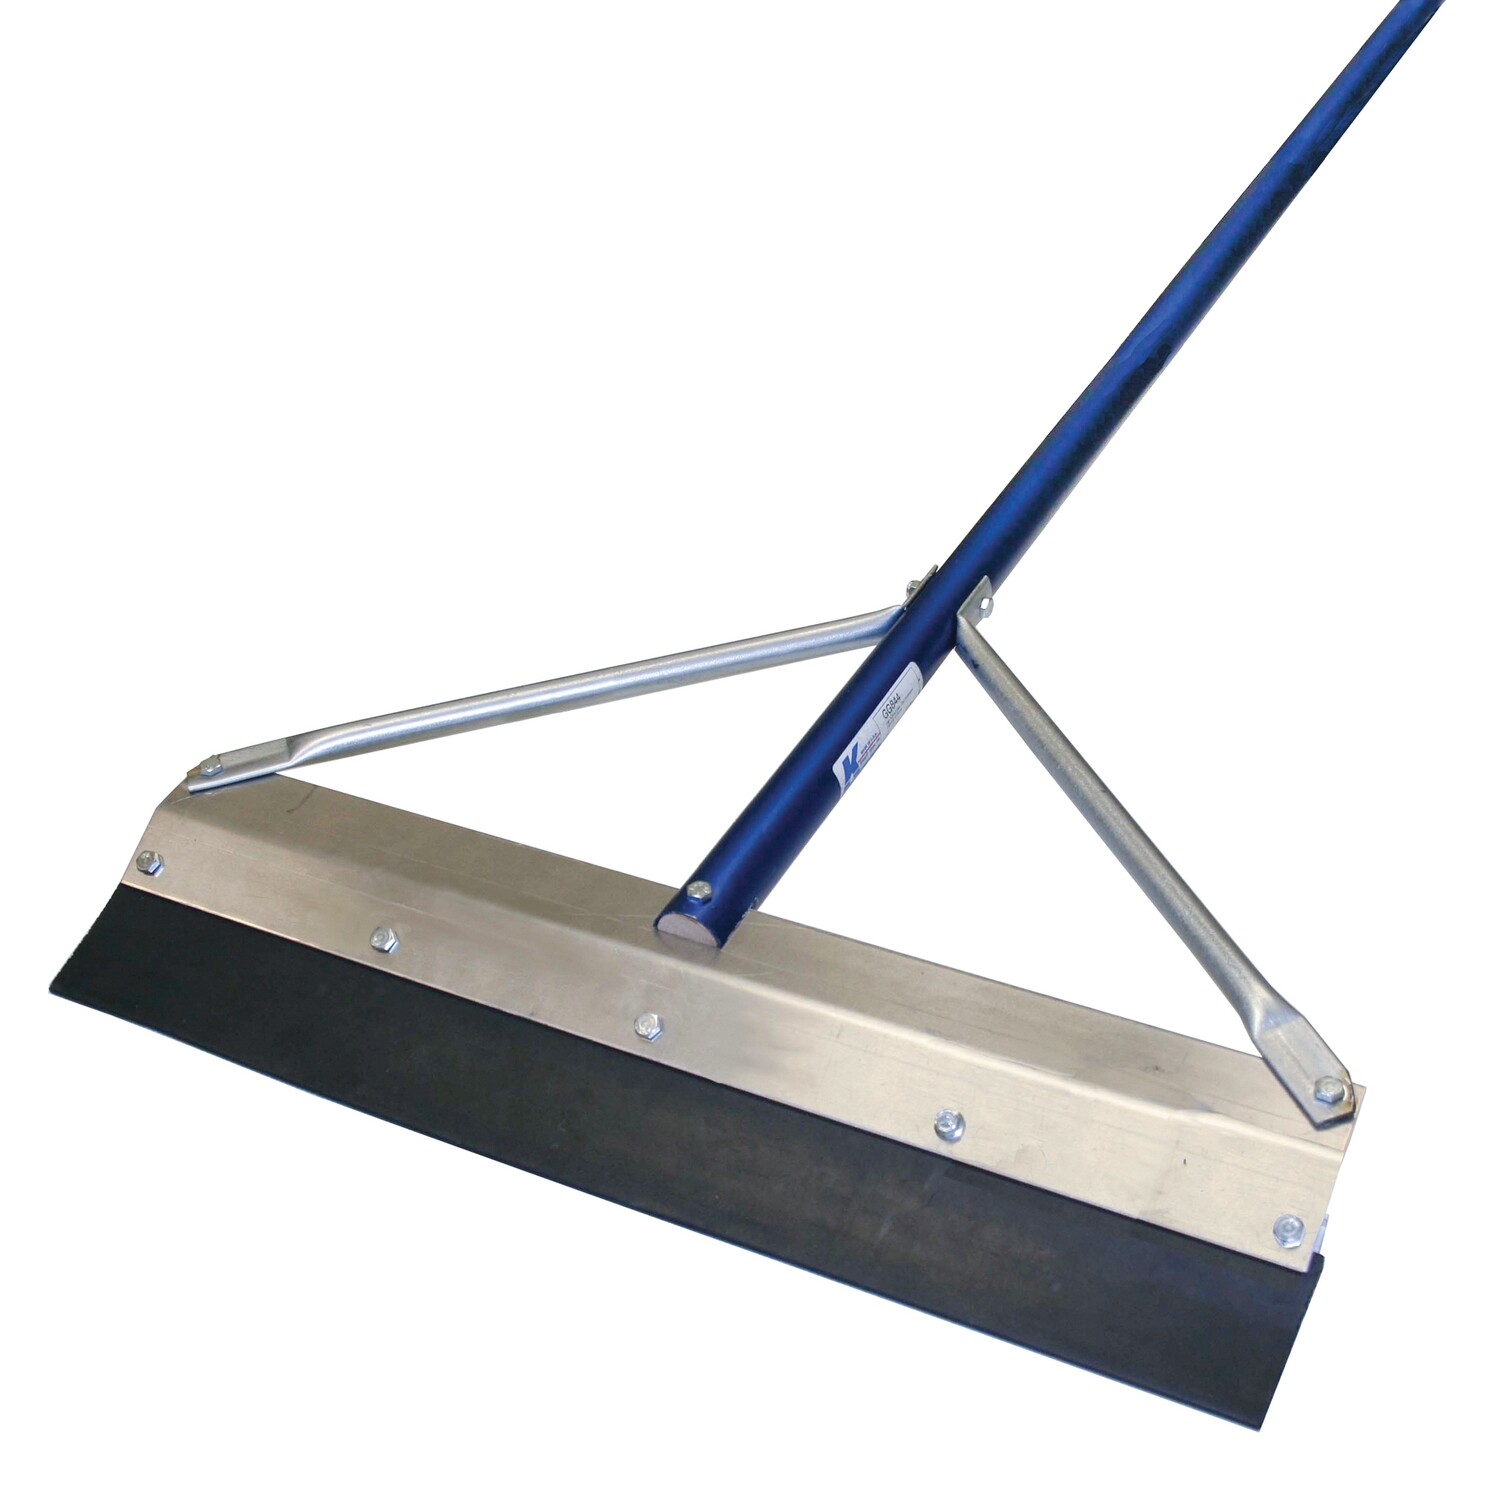 Kraft GG844RE-6 24" Round Edge Sealcoat Squeegee with 6' Handle Pack of 6